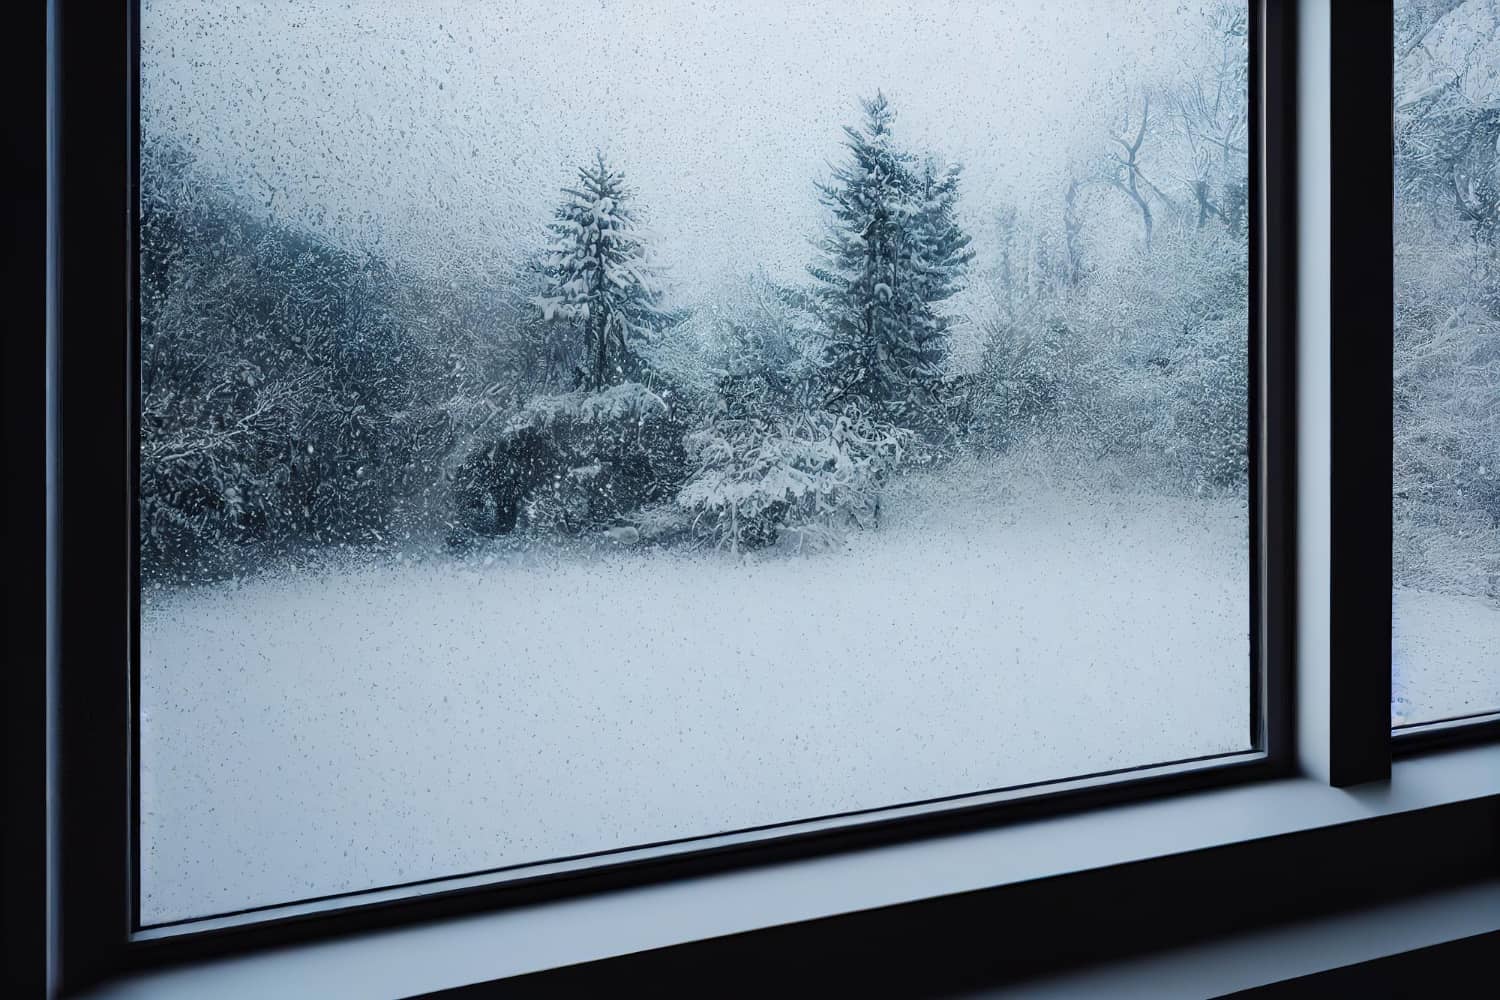 A drafty window is dotted with icy frost on the inside of the glass. Outside is a wintery scene of snow covered ground and trees.